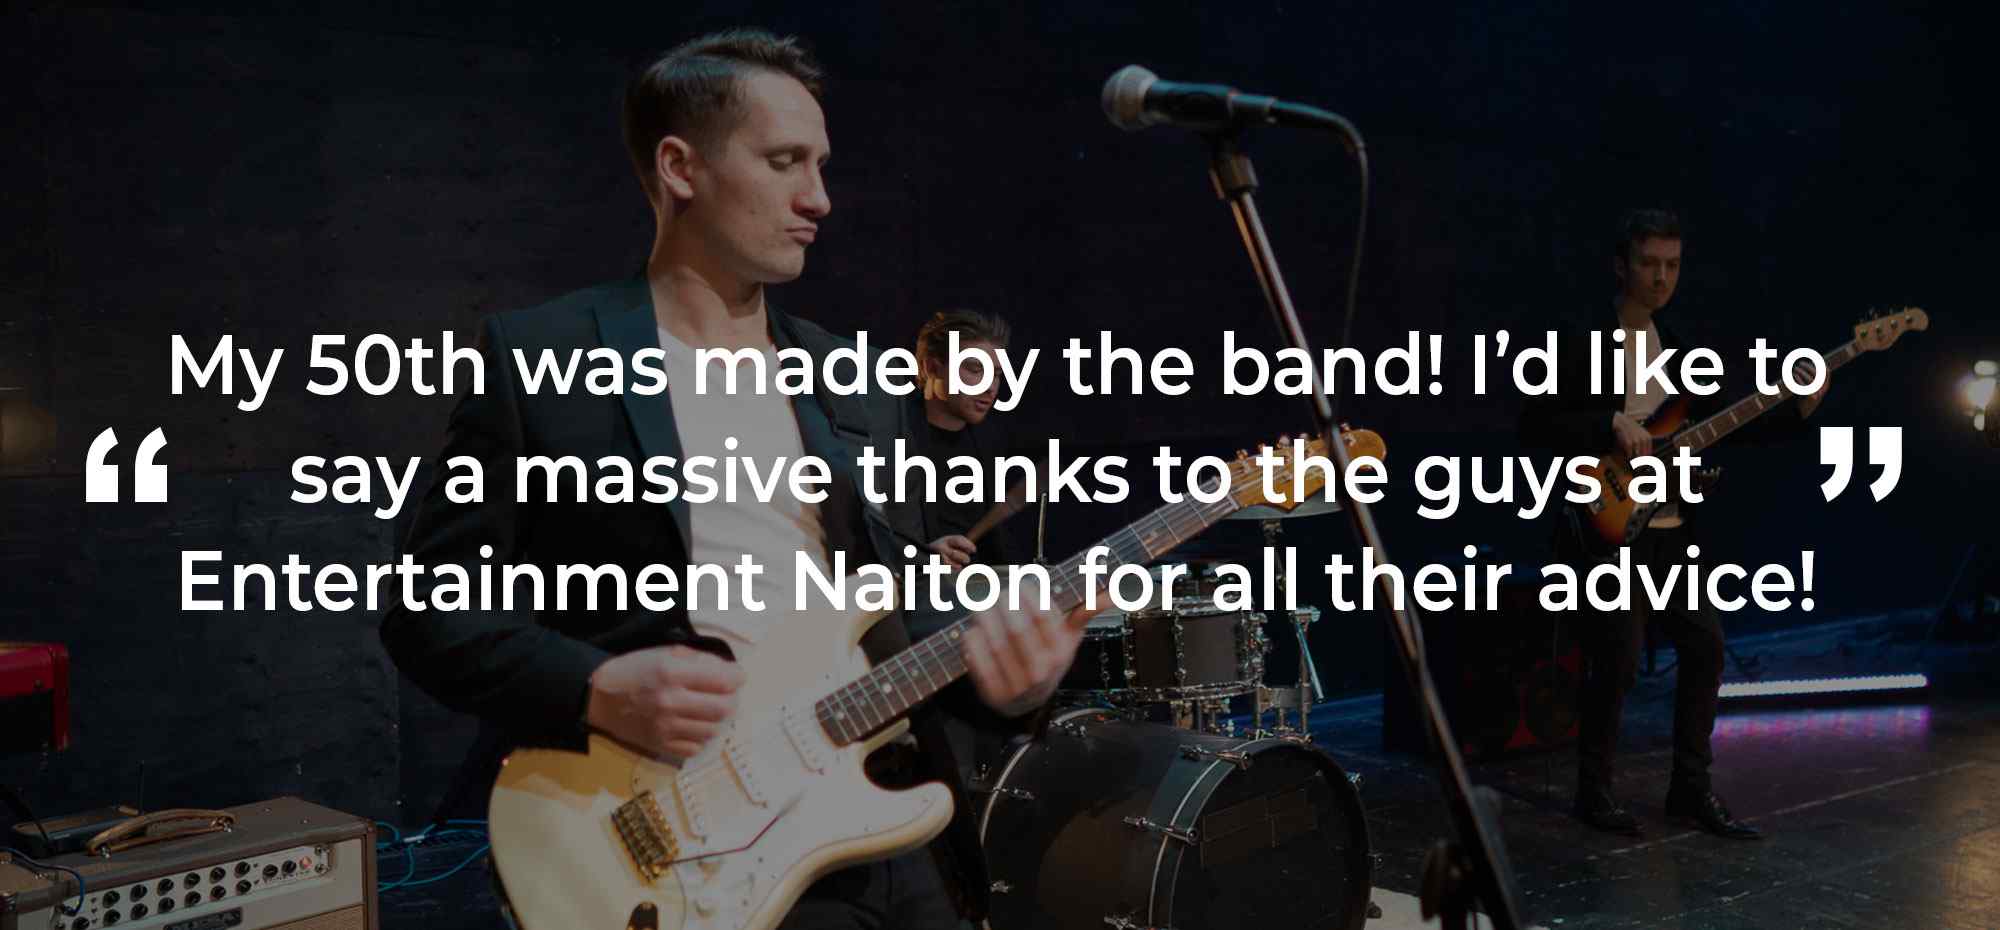 Client Review of a Party Band Essex